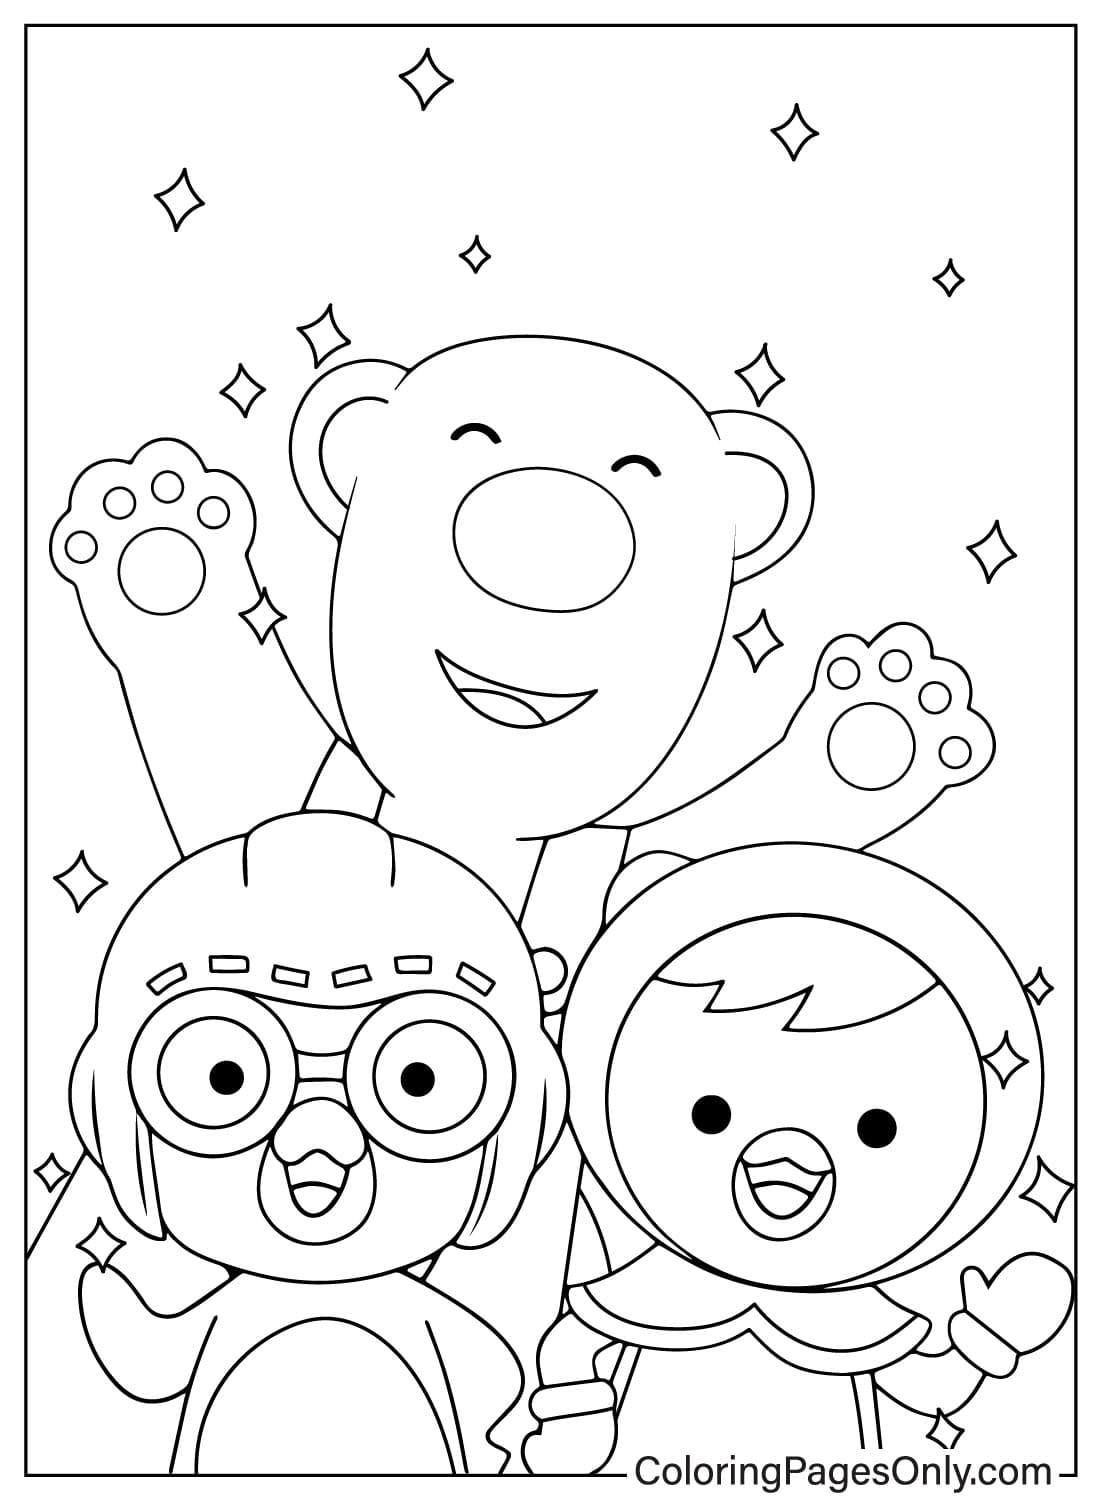 Free Pororo the Little Penguin Coloring Page from Pororo the Little Penguin